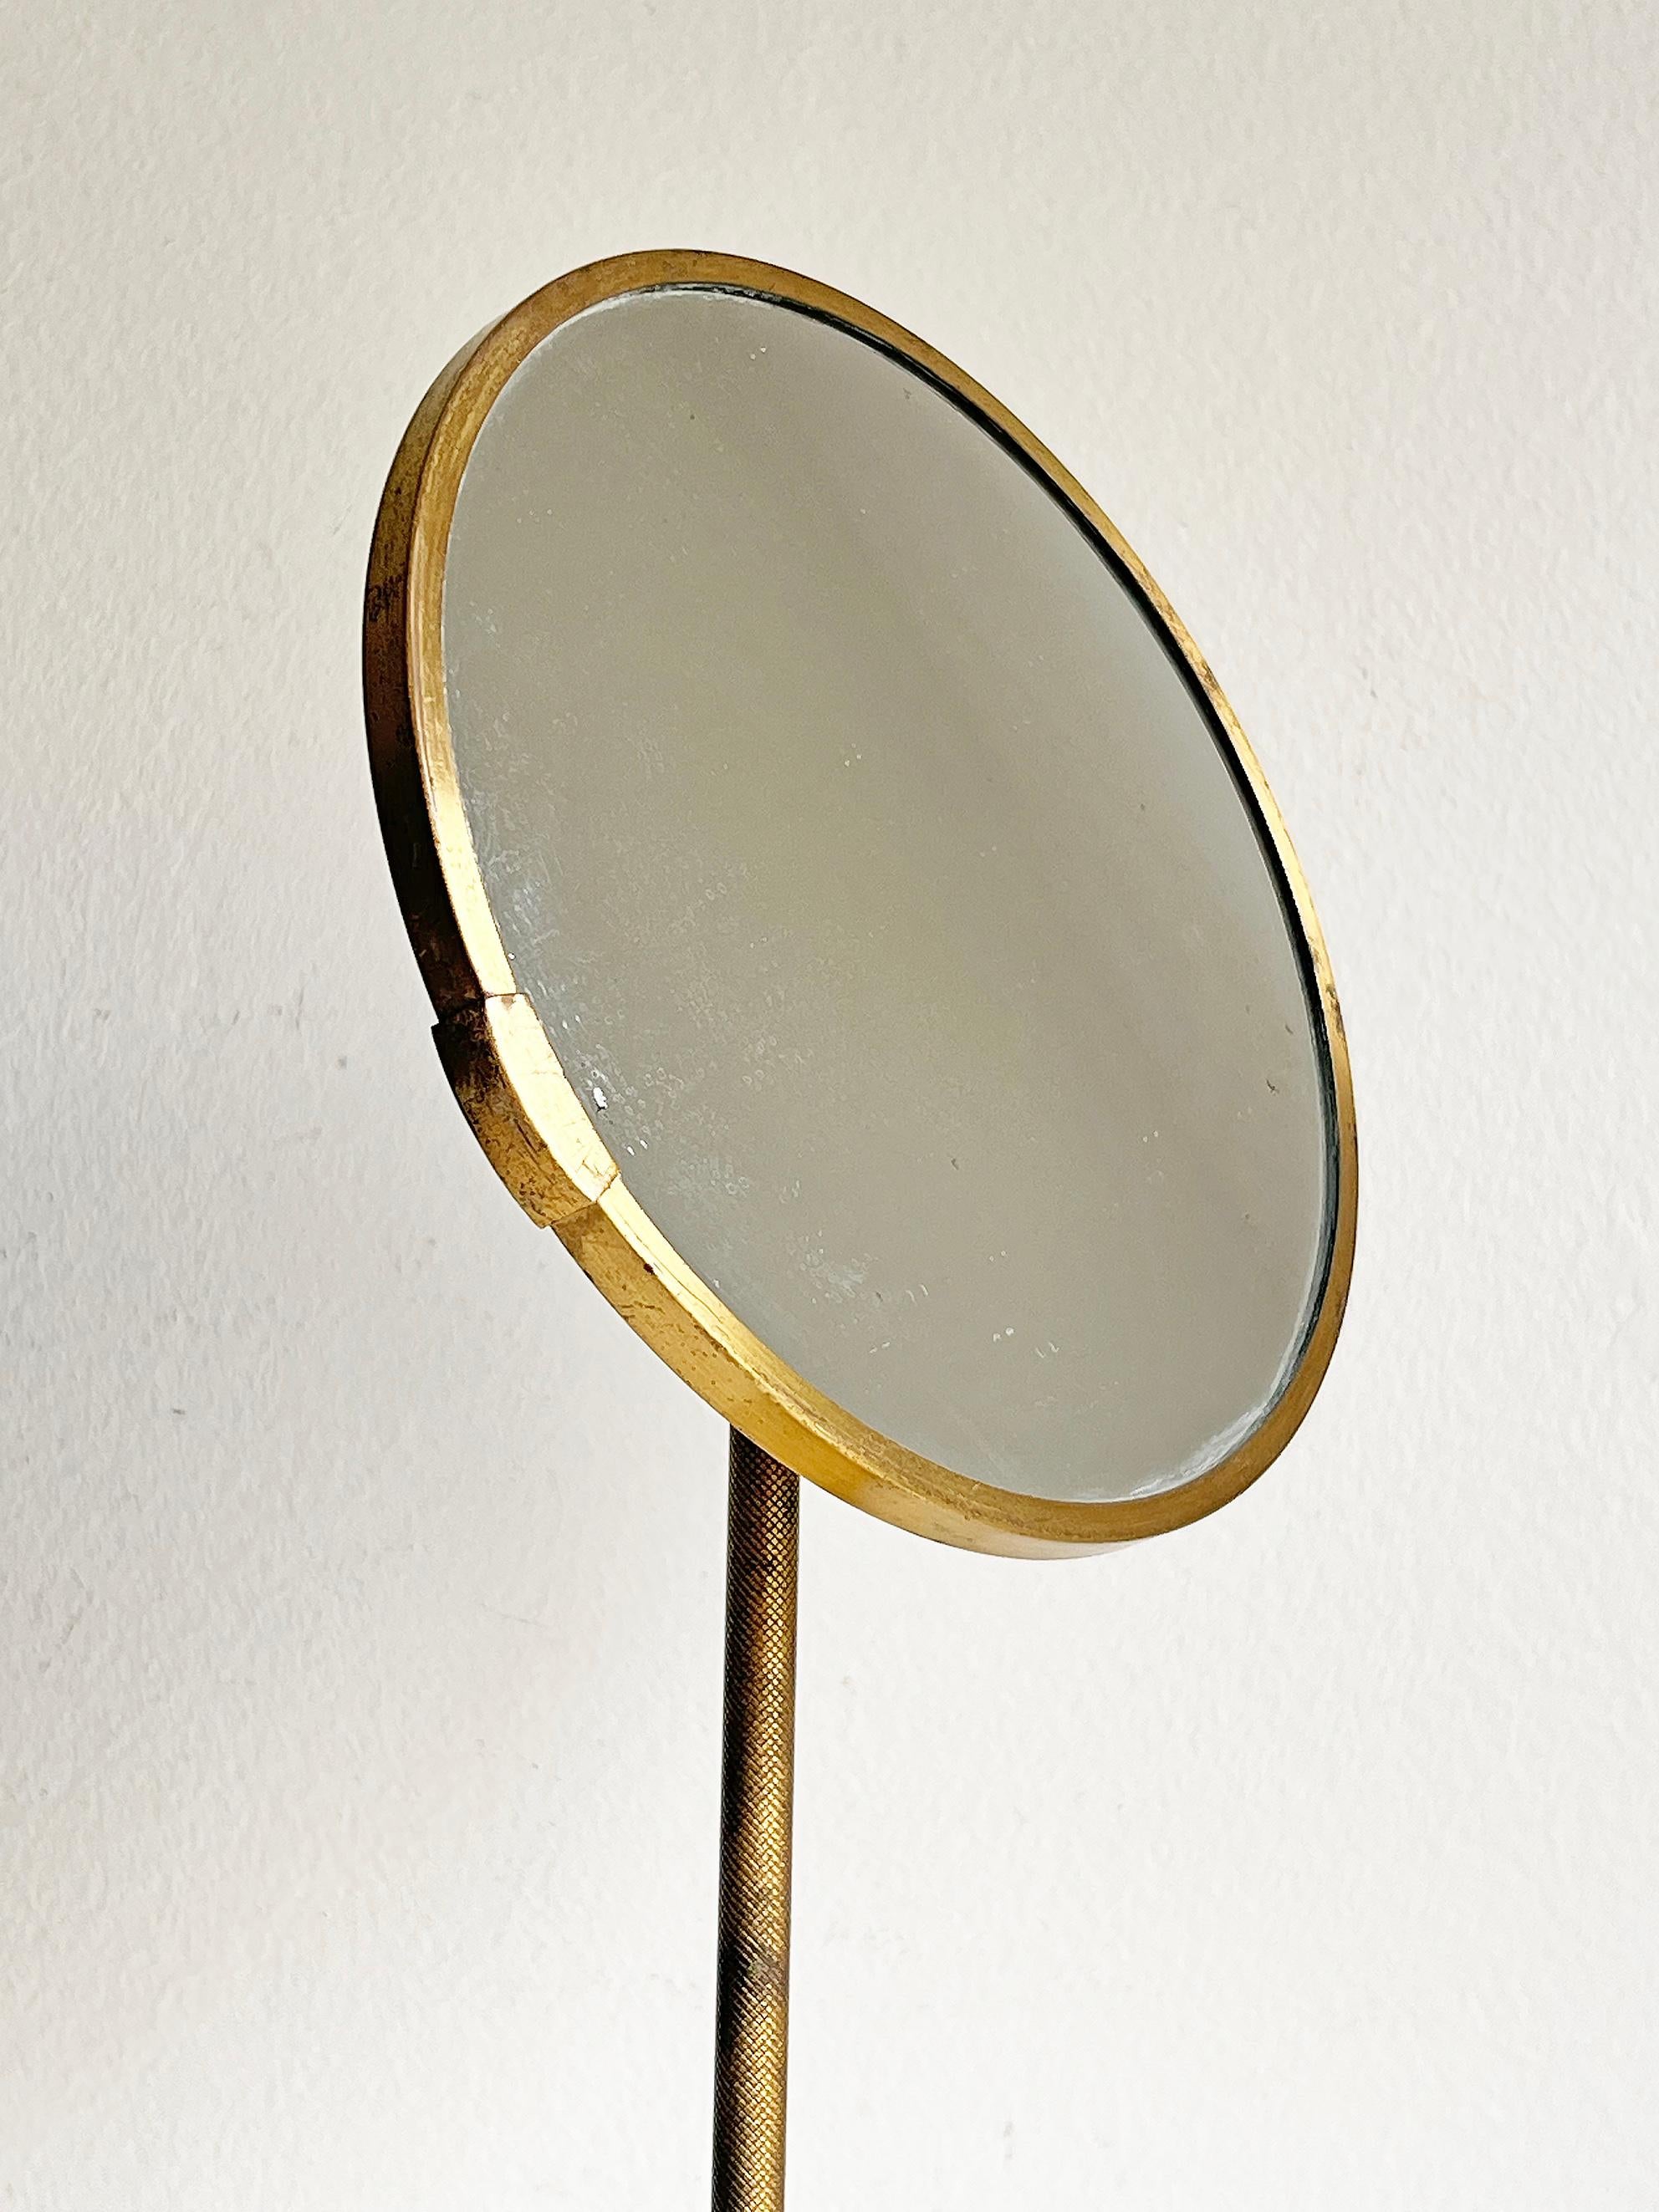 Mid-Century Modern Table Mirror in Brass, circa 1950s For Sale 1